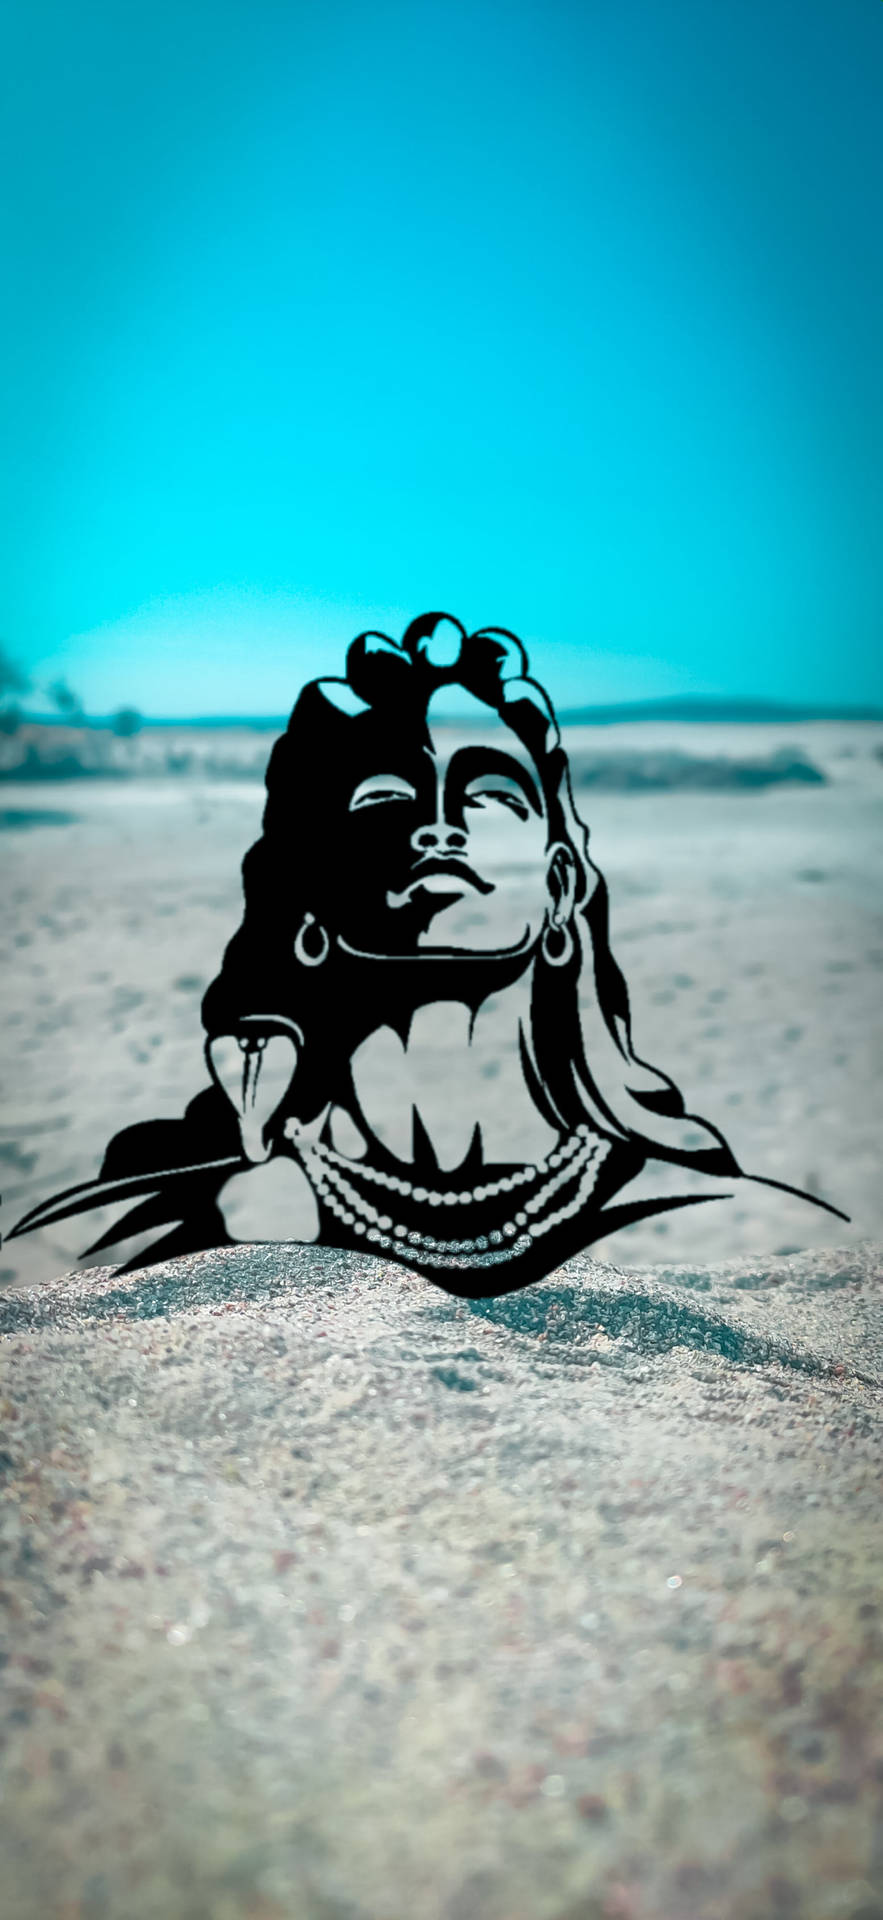 Download Shiva Iphone On Sand Wallpaper | Wallpapers.com